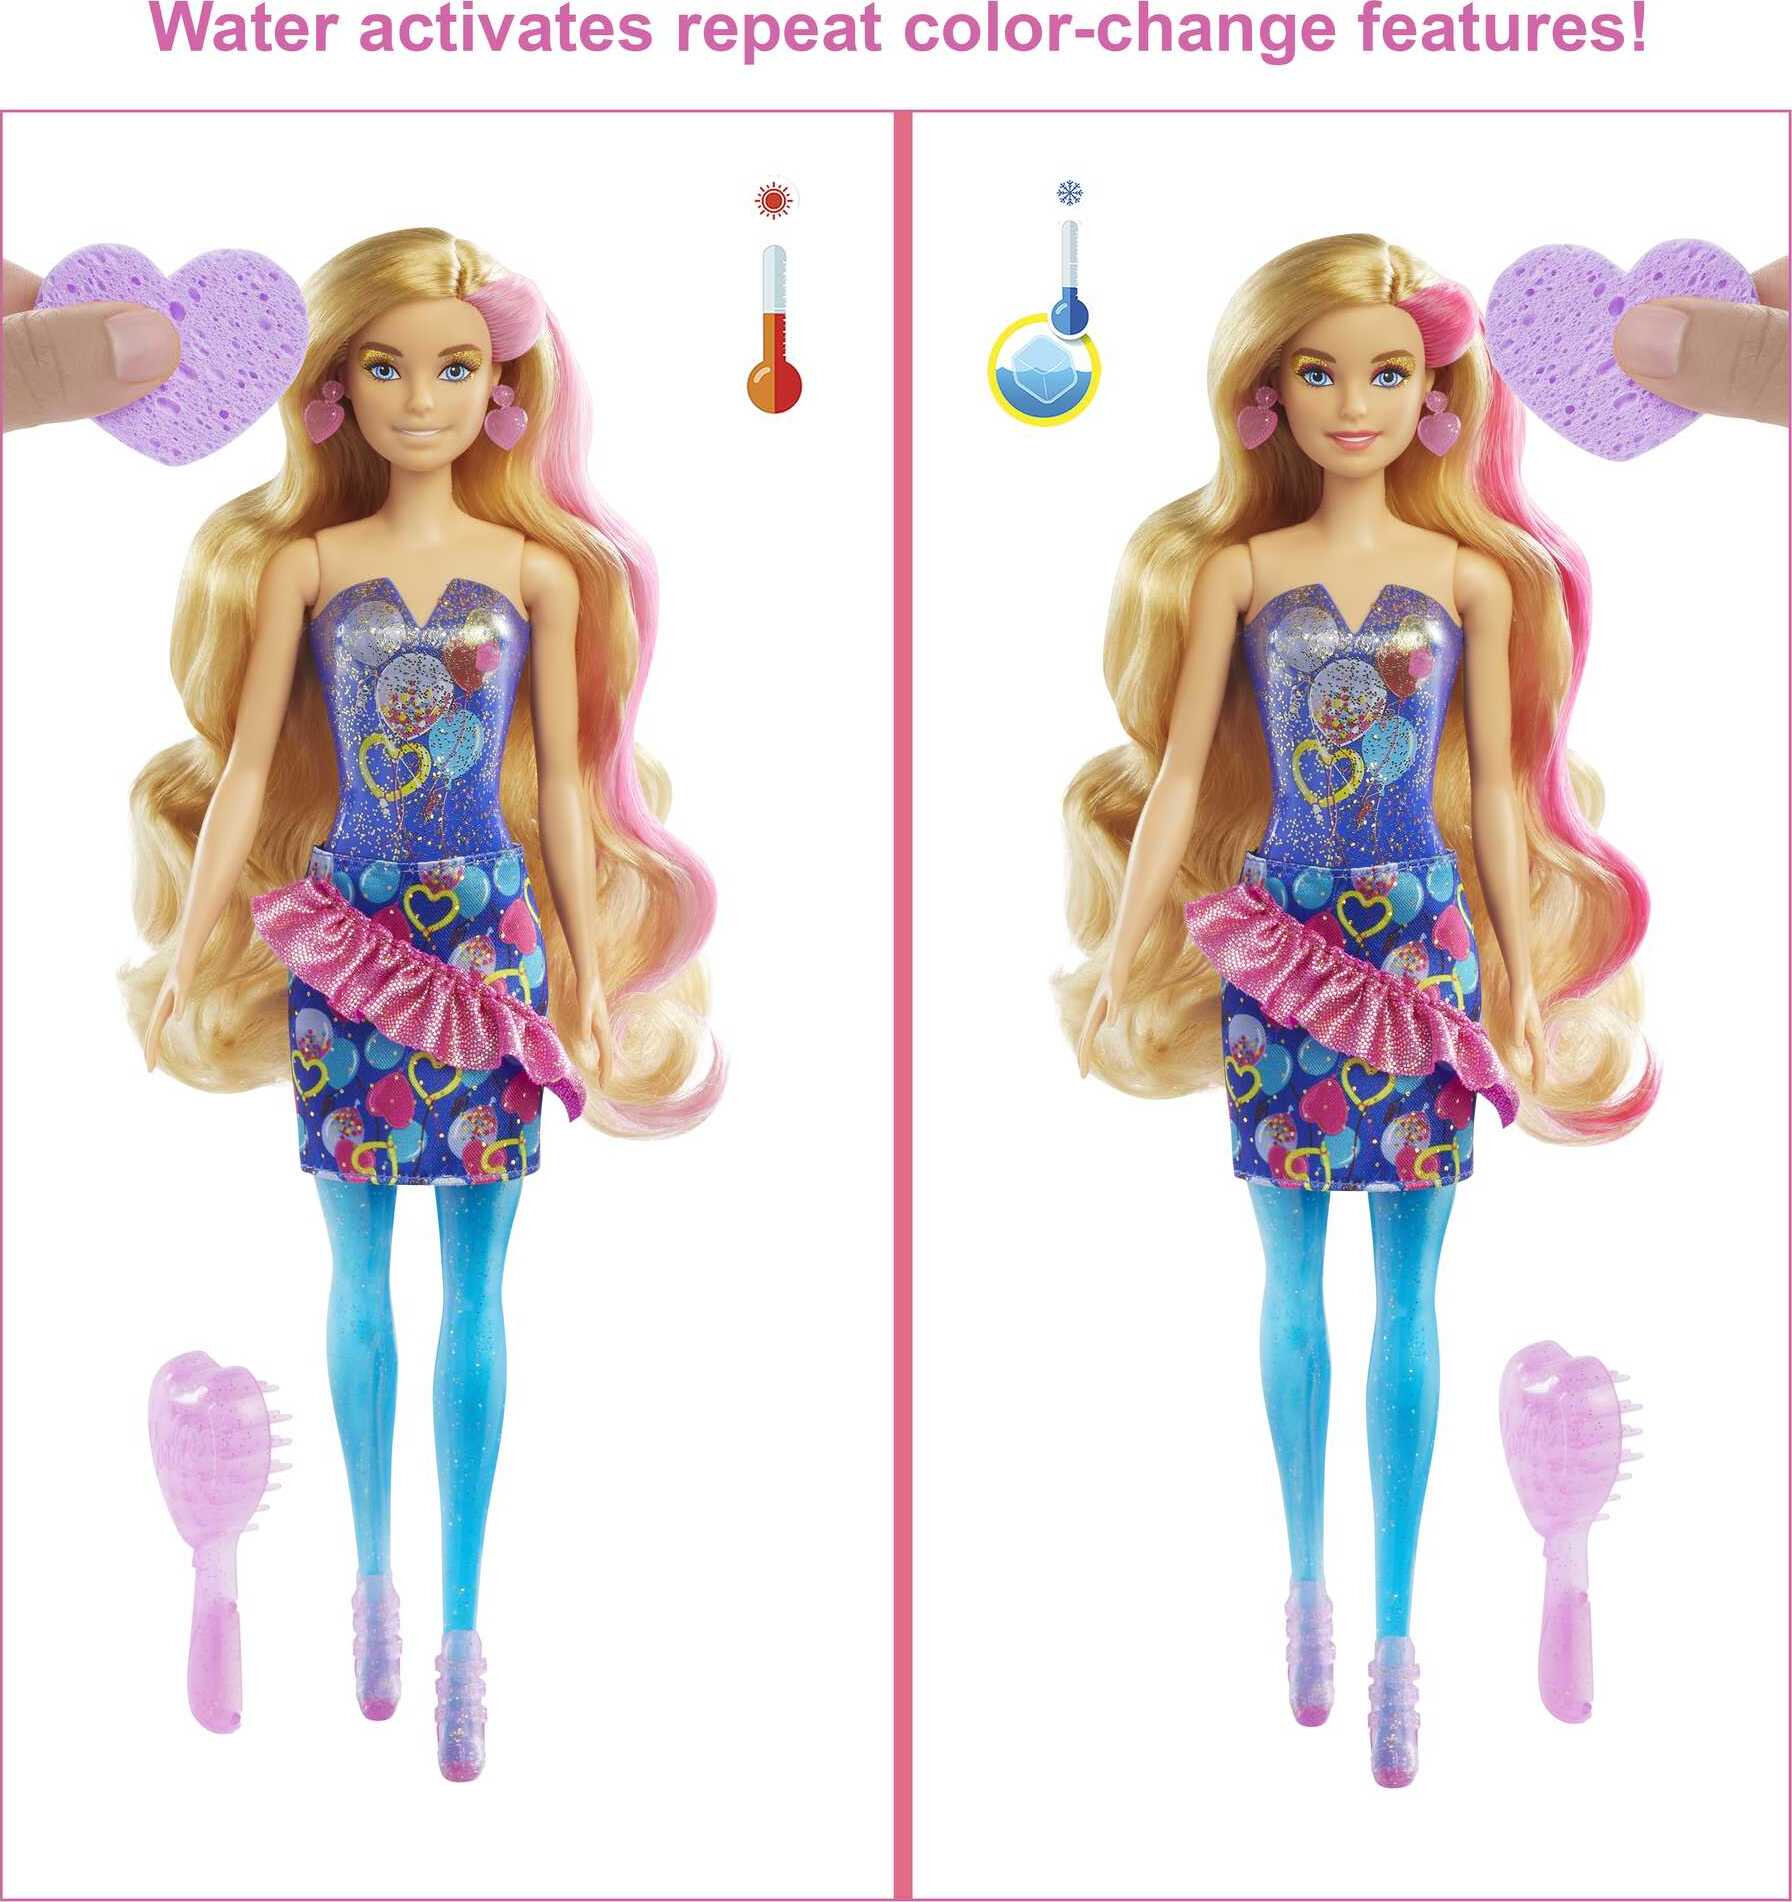 Barbie Color Reveal Party Series Fashion Doll & Accessories, 7 Surprises (Styles May Vary) - image 5 of 7